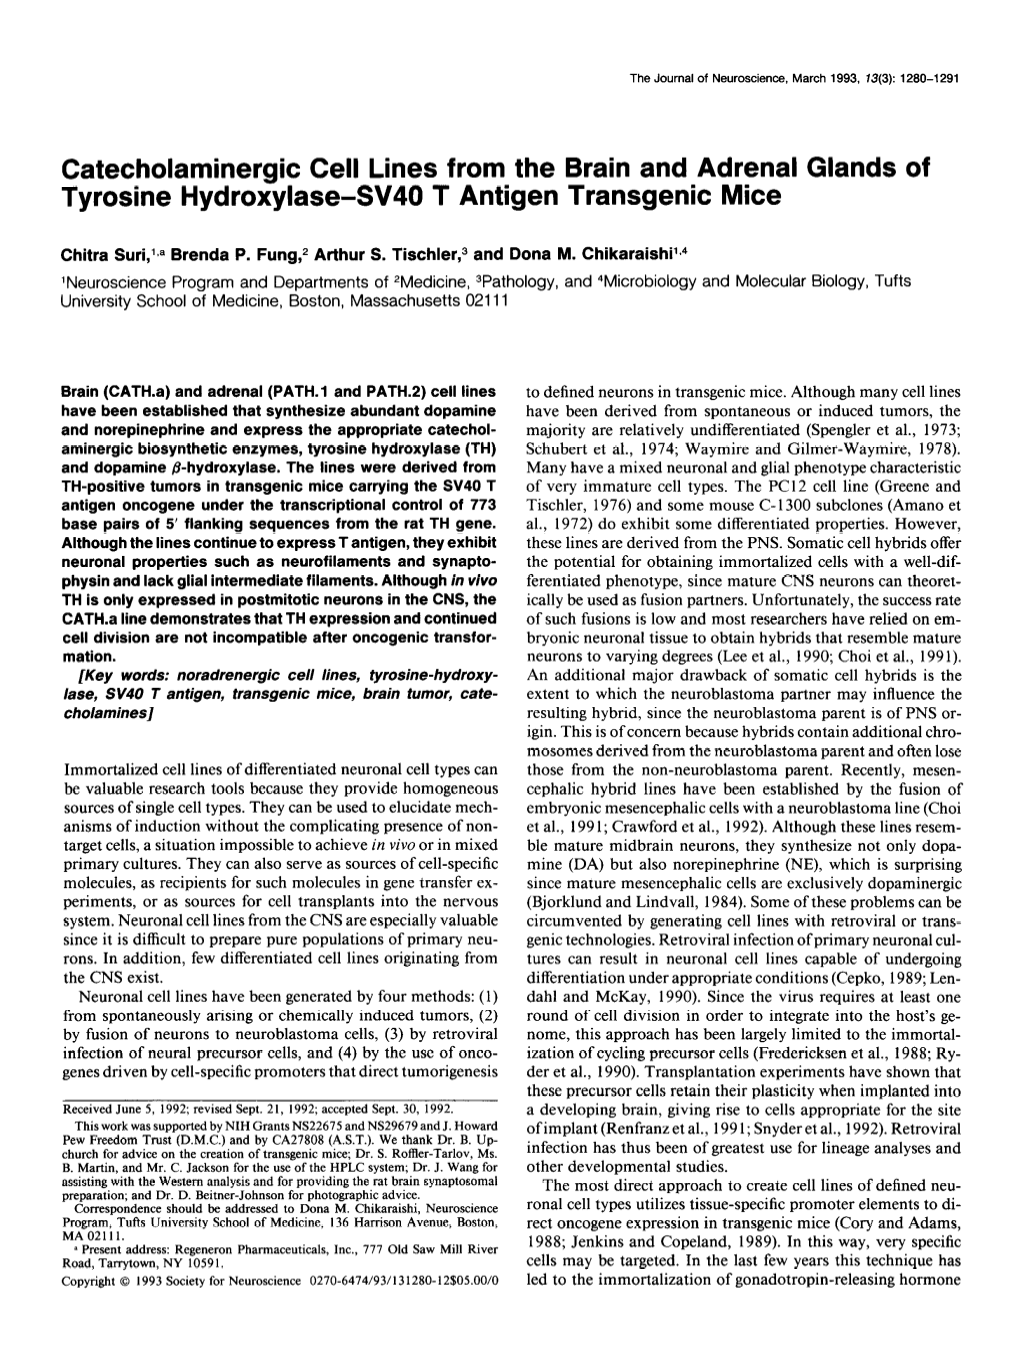 Catecholaminergic Cell Lines from the Brain and Adrenal Glands of Tyrosine Hydroxylase-SV40 T Antigen Transgenic Mice